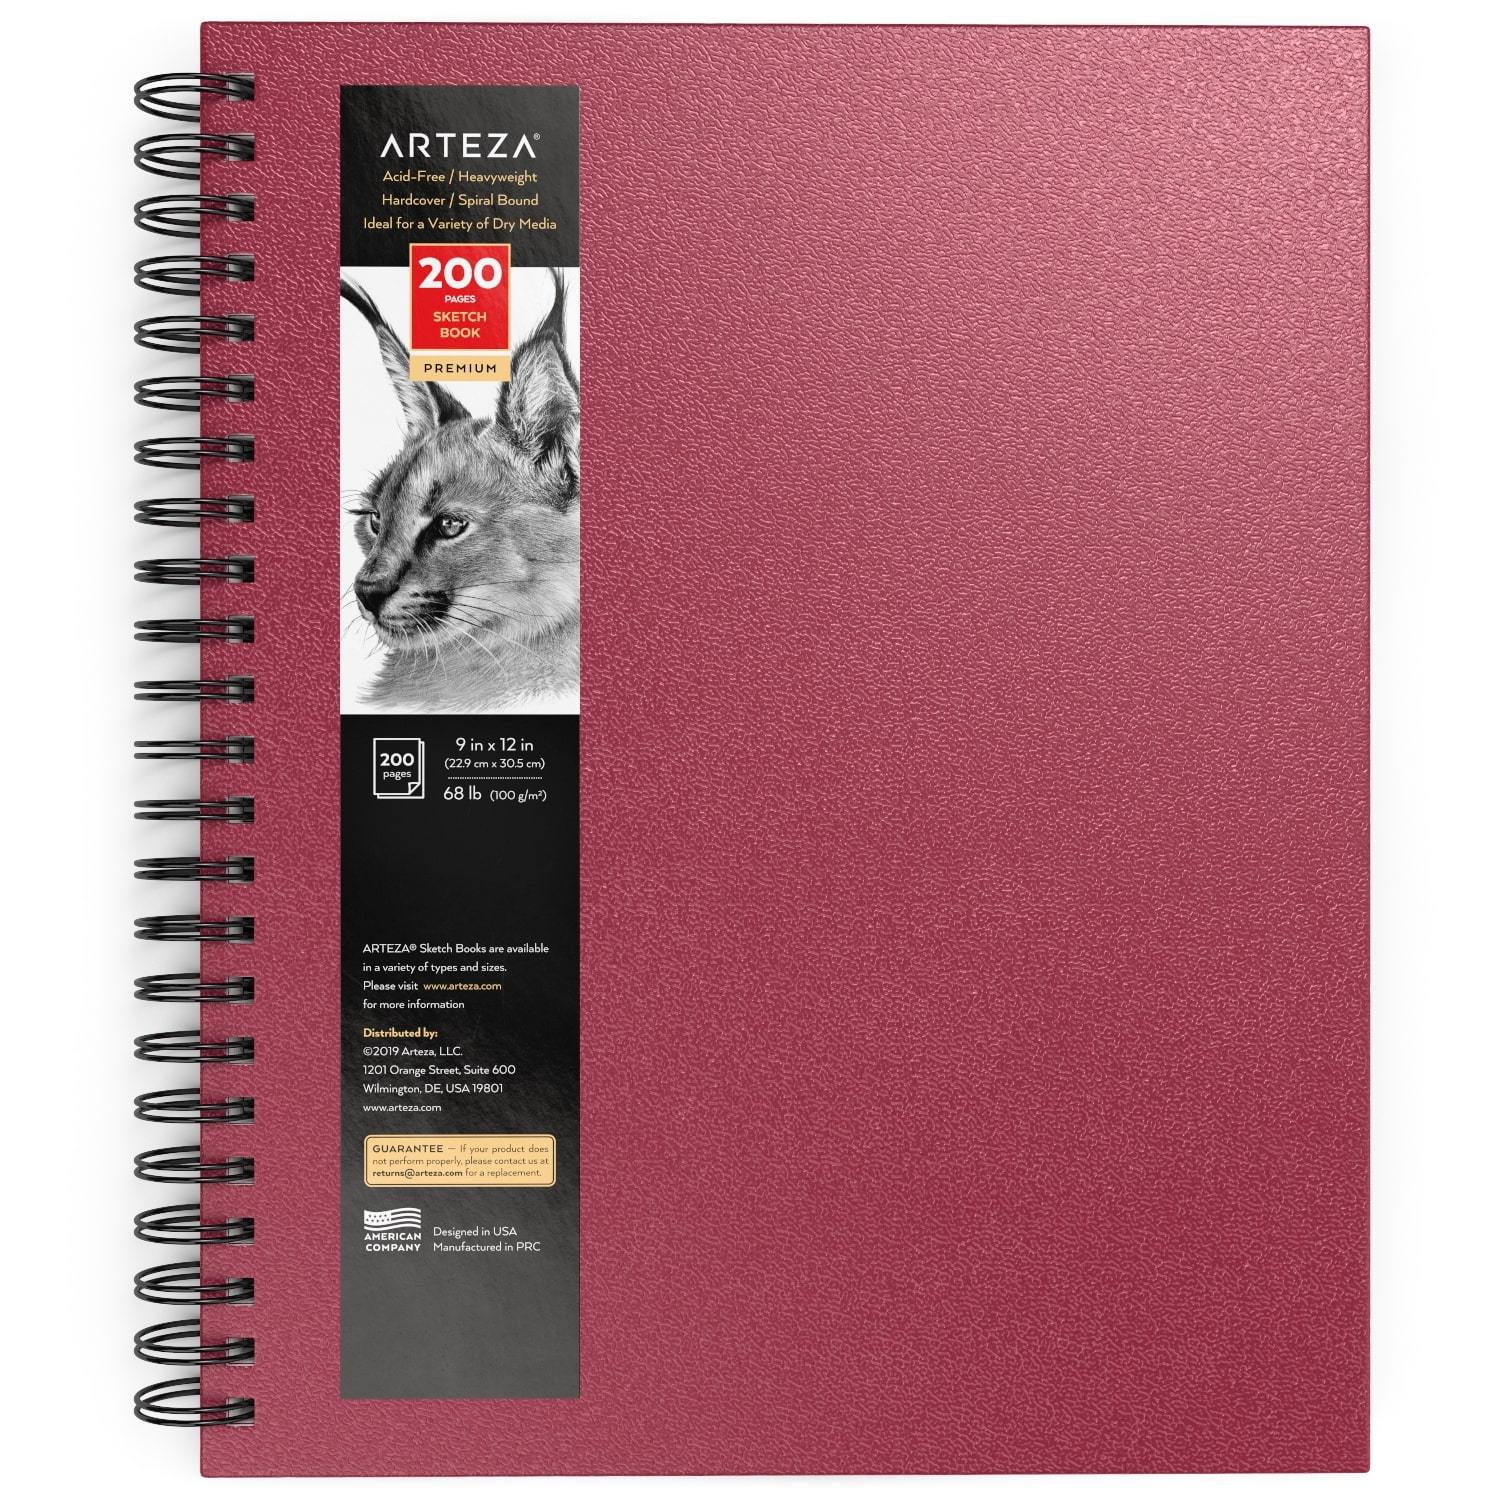  Arteza Sketch Book, 9x12-inch Gray Drawing Pad, 100 Sheets,  68 Lb 100 GSM, Hardcover Drawing Book, Spiral-Bound Sketch Pad For Pencils,  Charcoal, Pens, Crayons And Other Dry Media